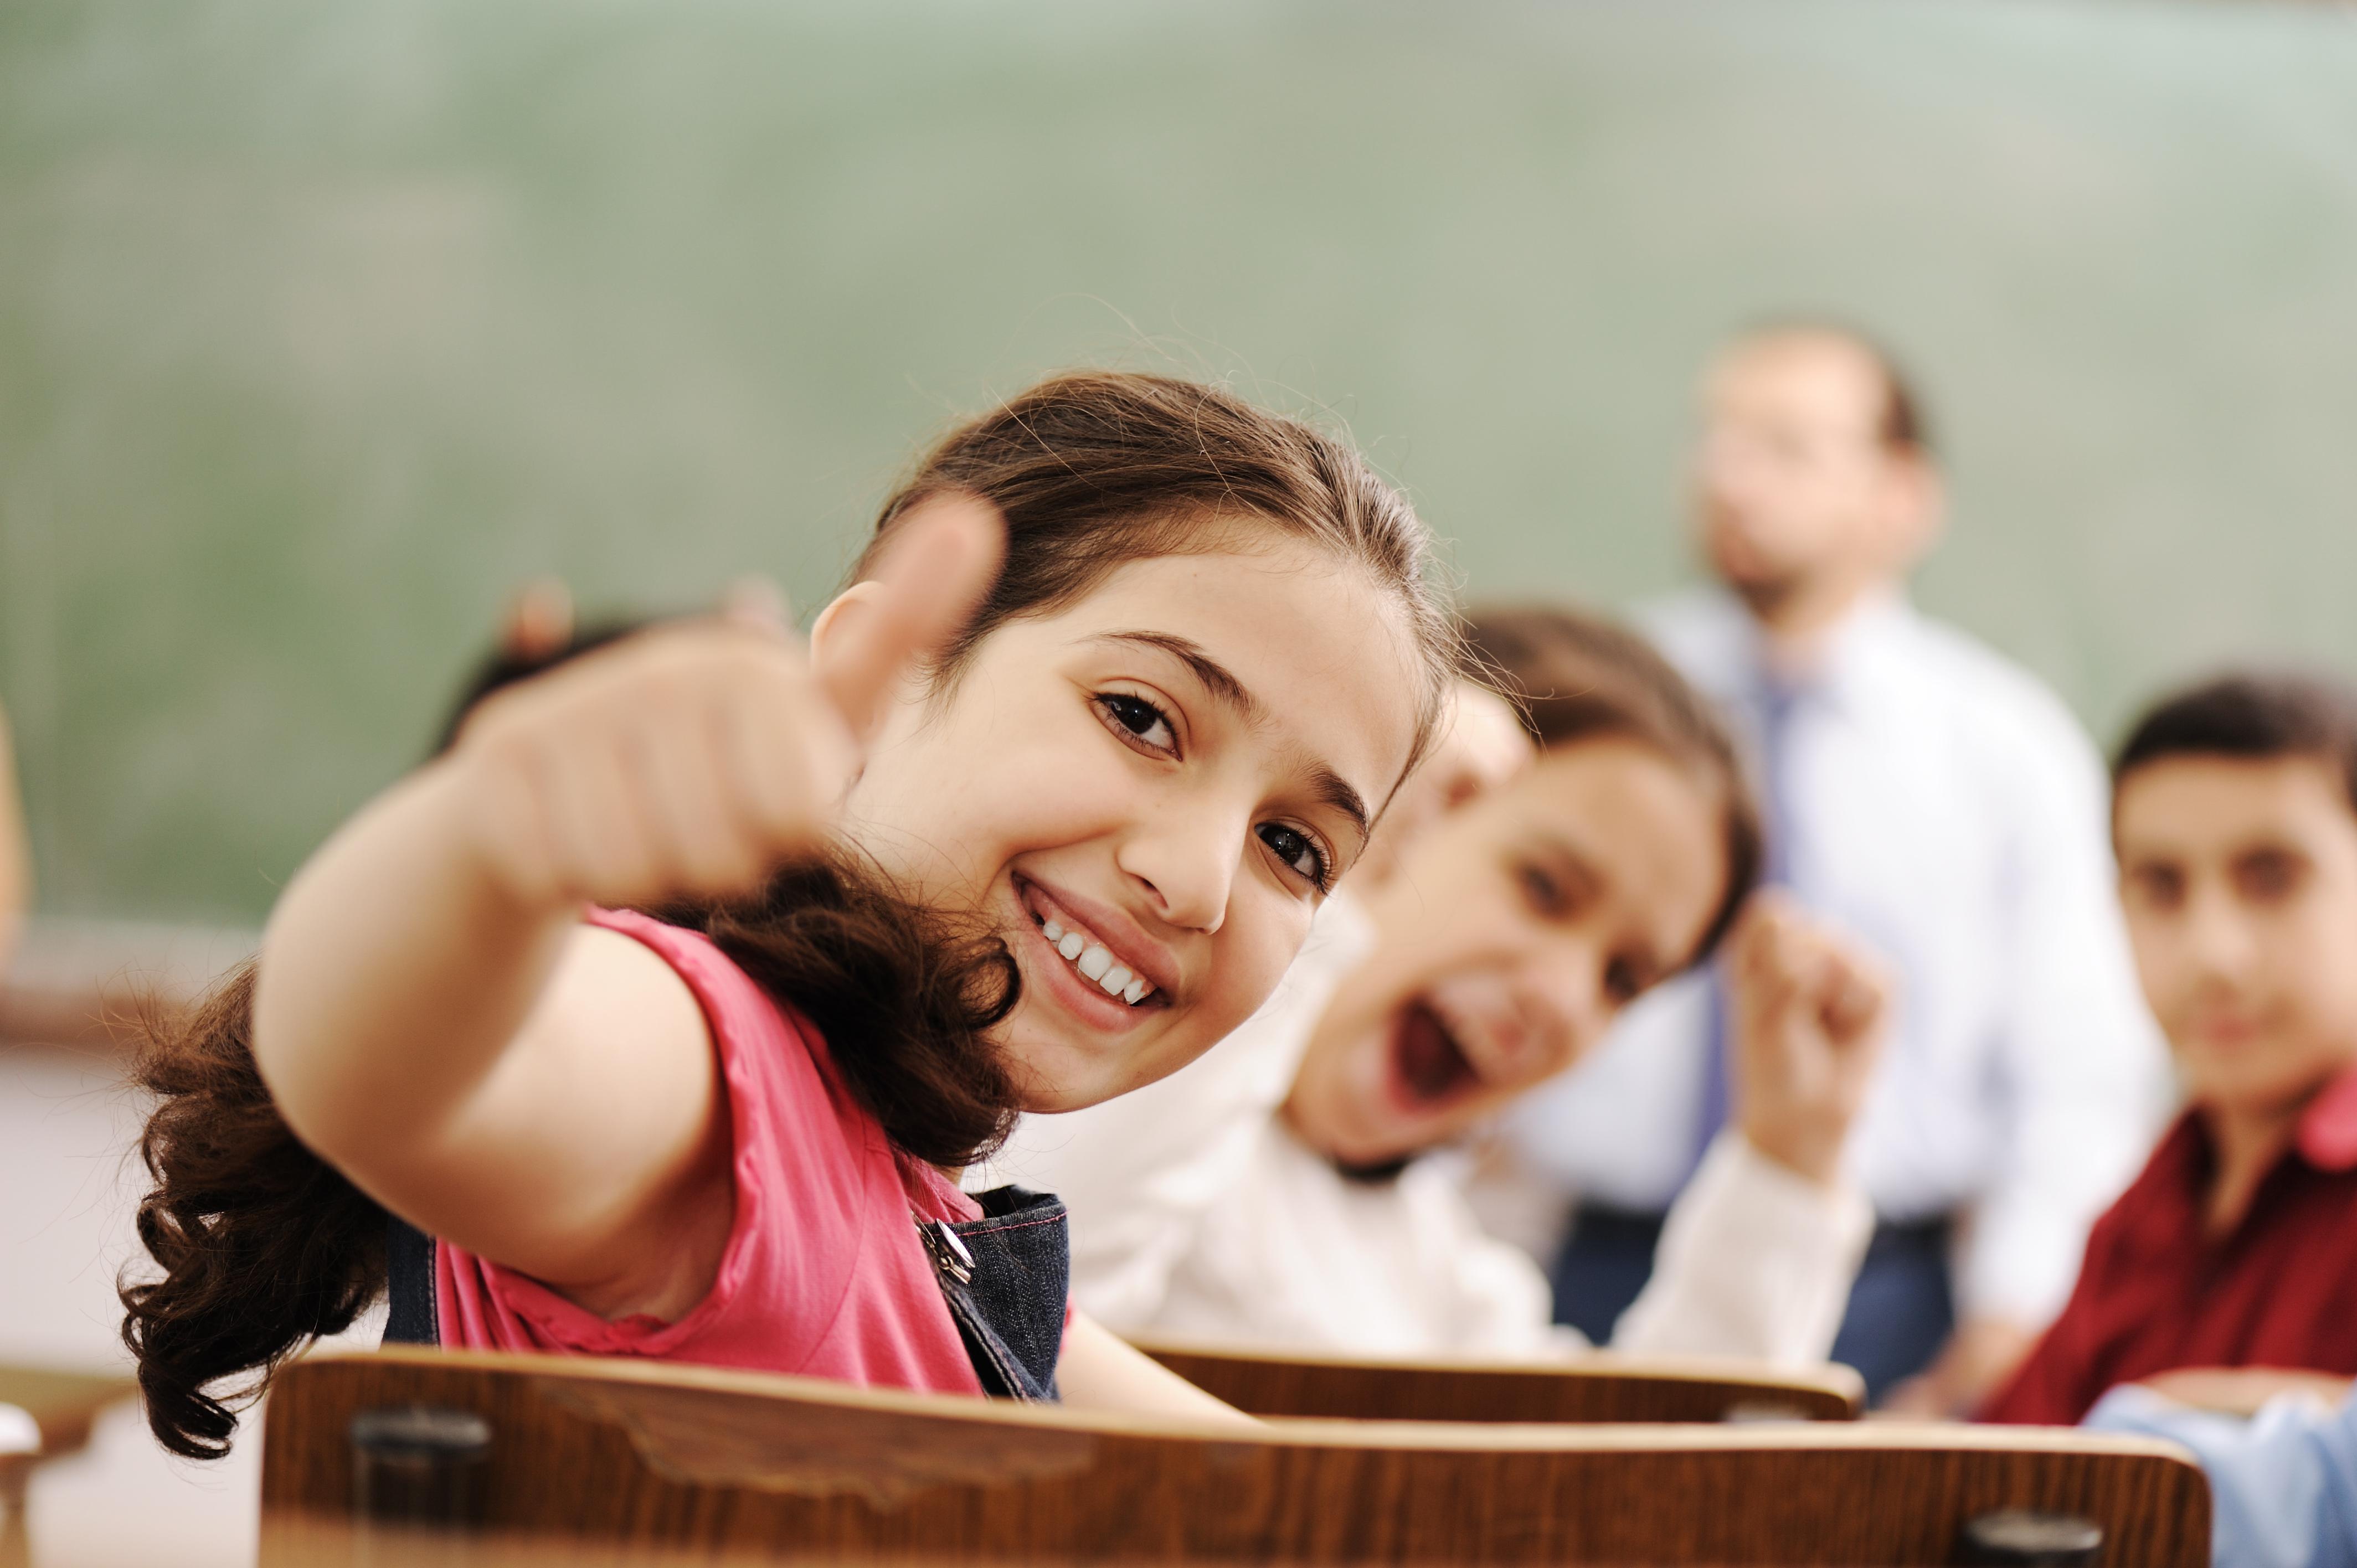 Blog: Positive School Culture: What Matters the Most in K-12 Education